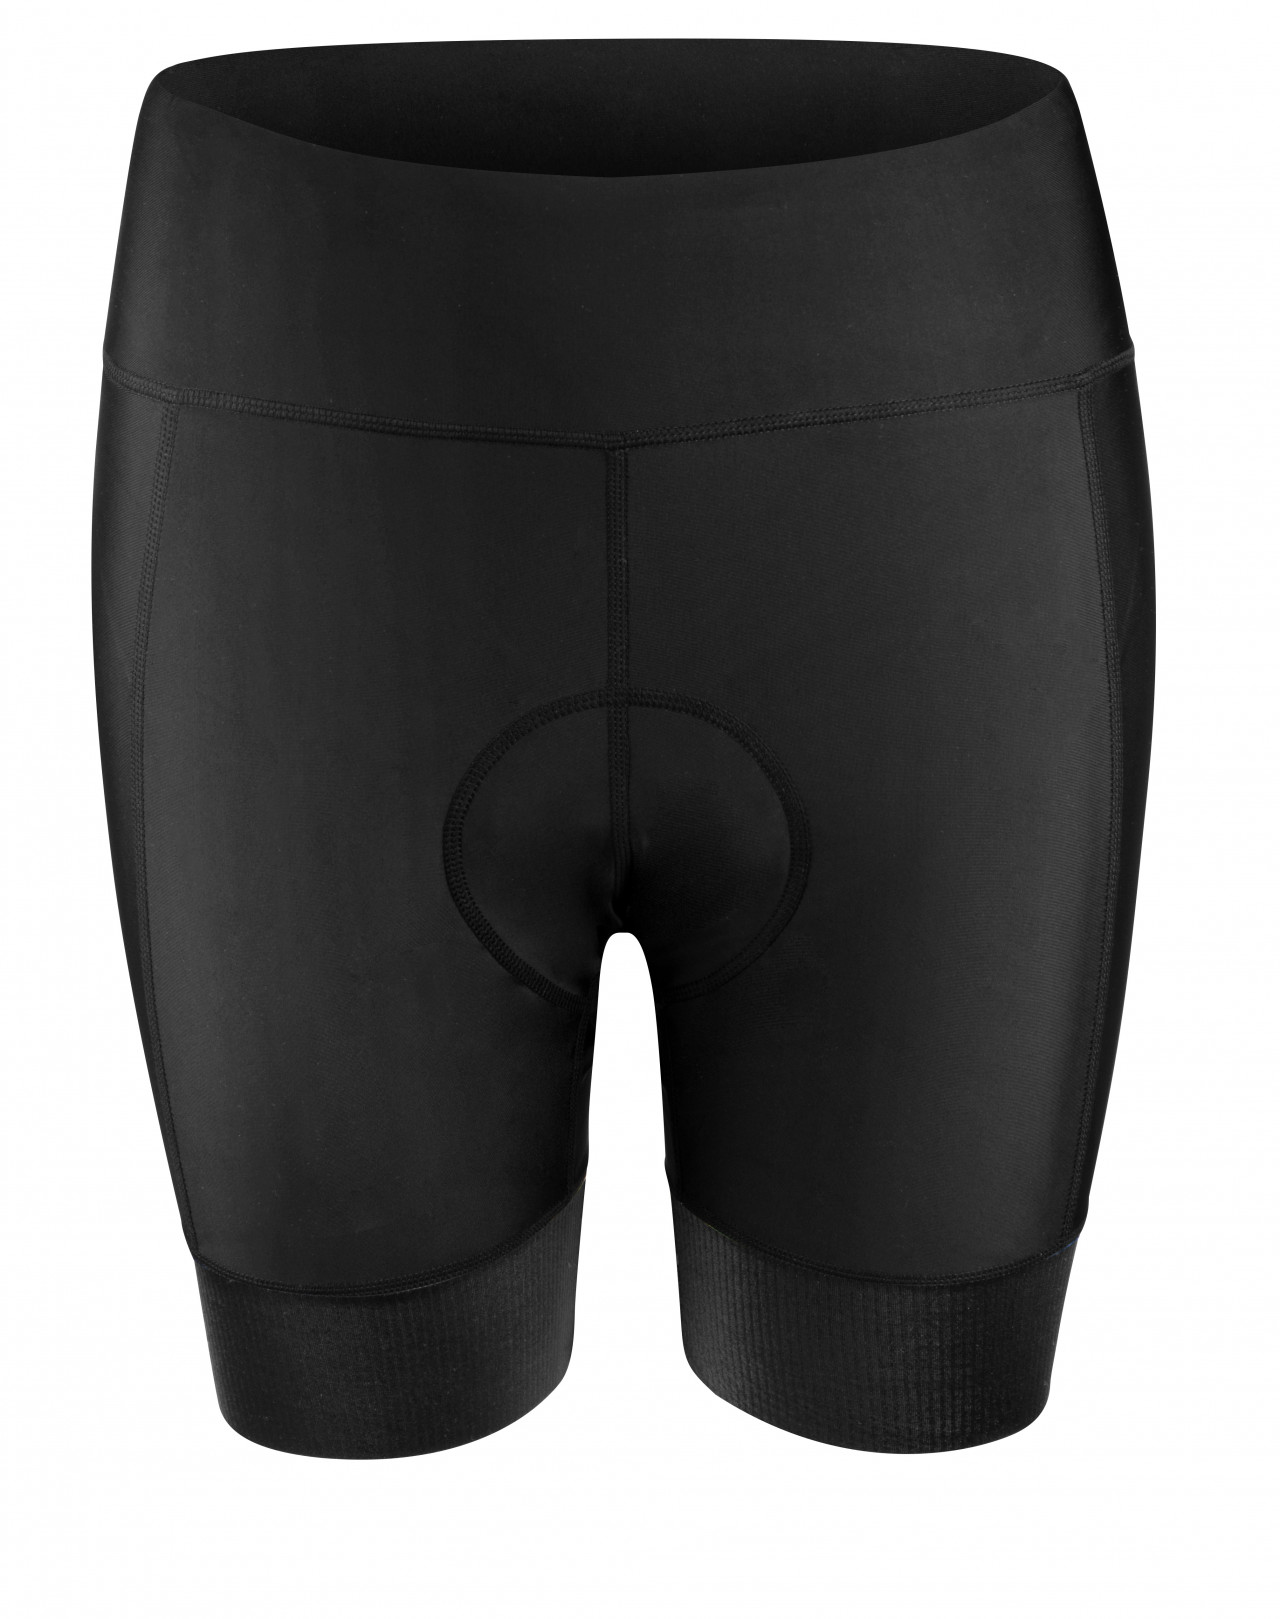 Shorts F VICTORY LADY to waist with pad, black XXL